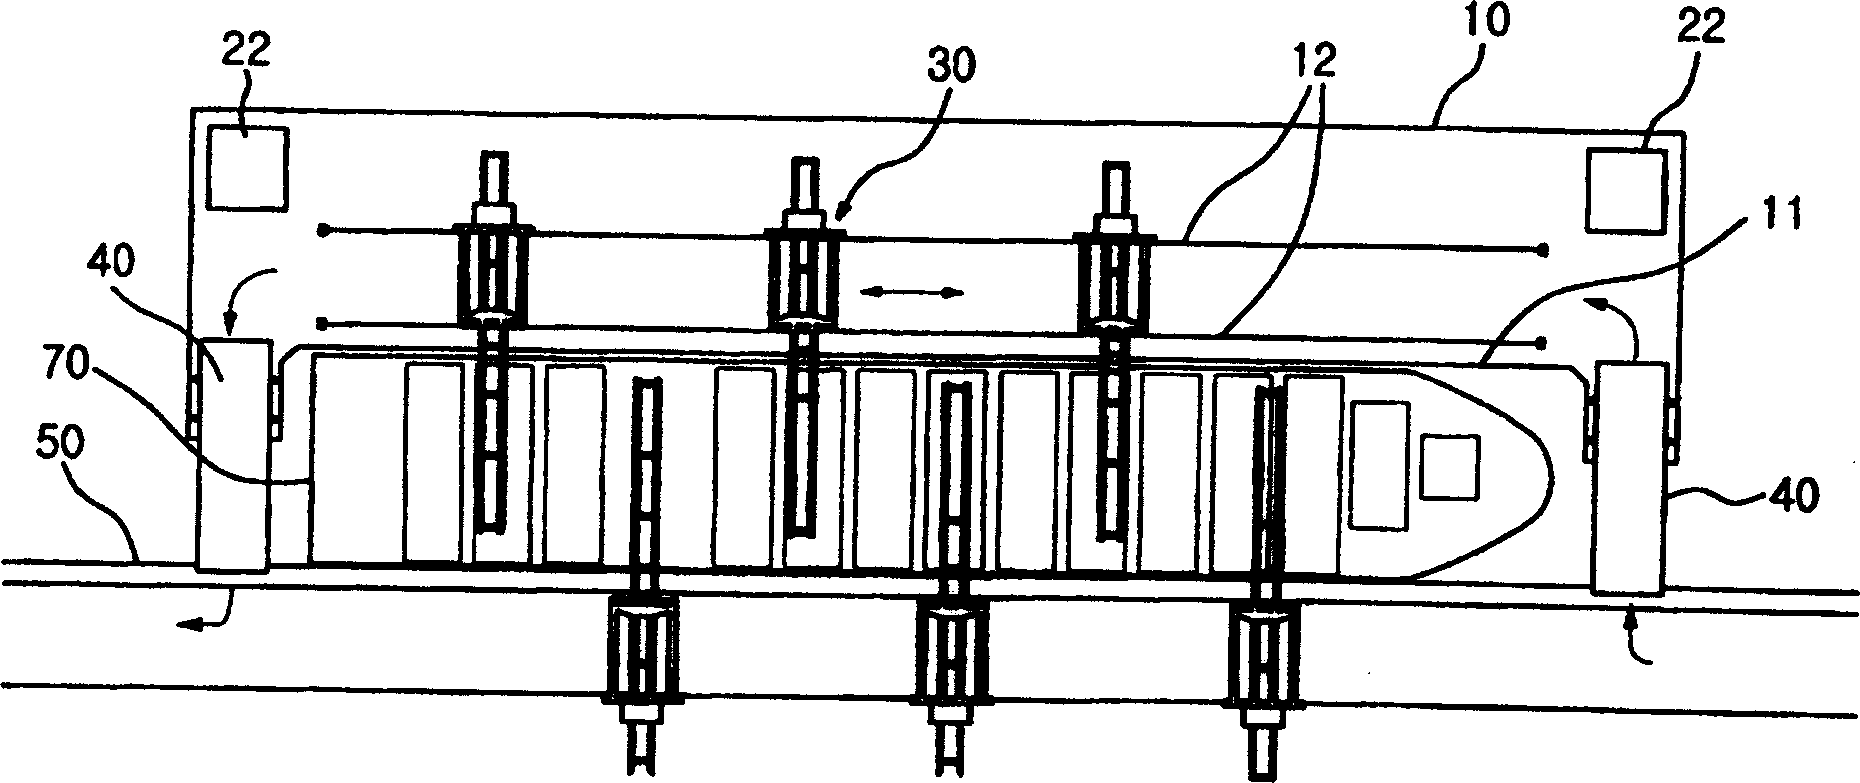 Apparatus for loading and unloading cargo at sea-side of ship